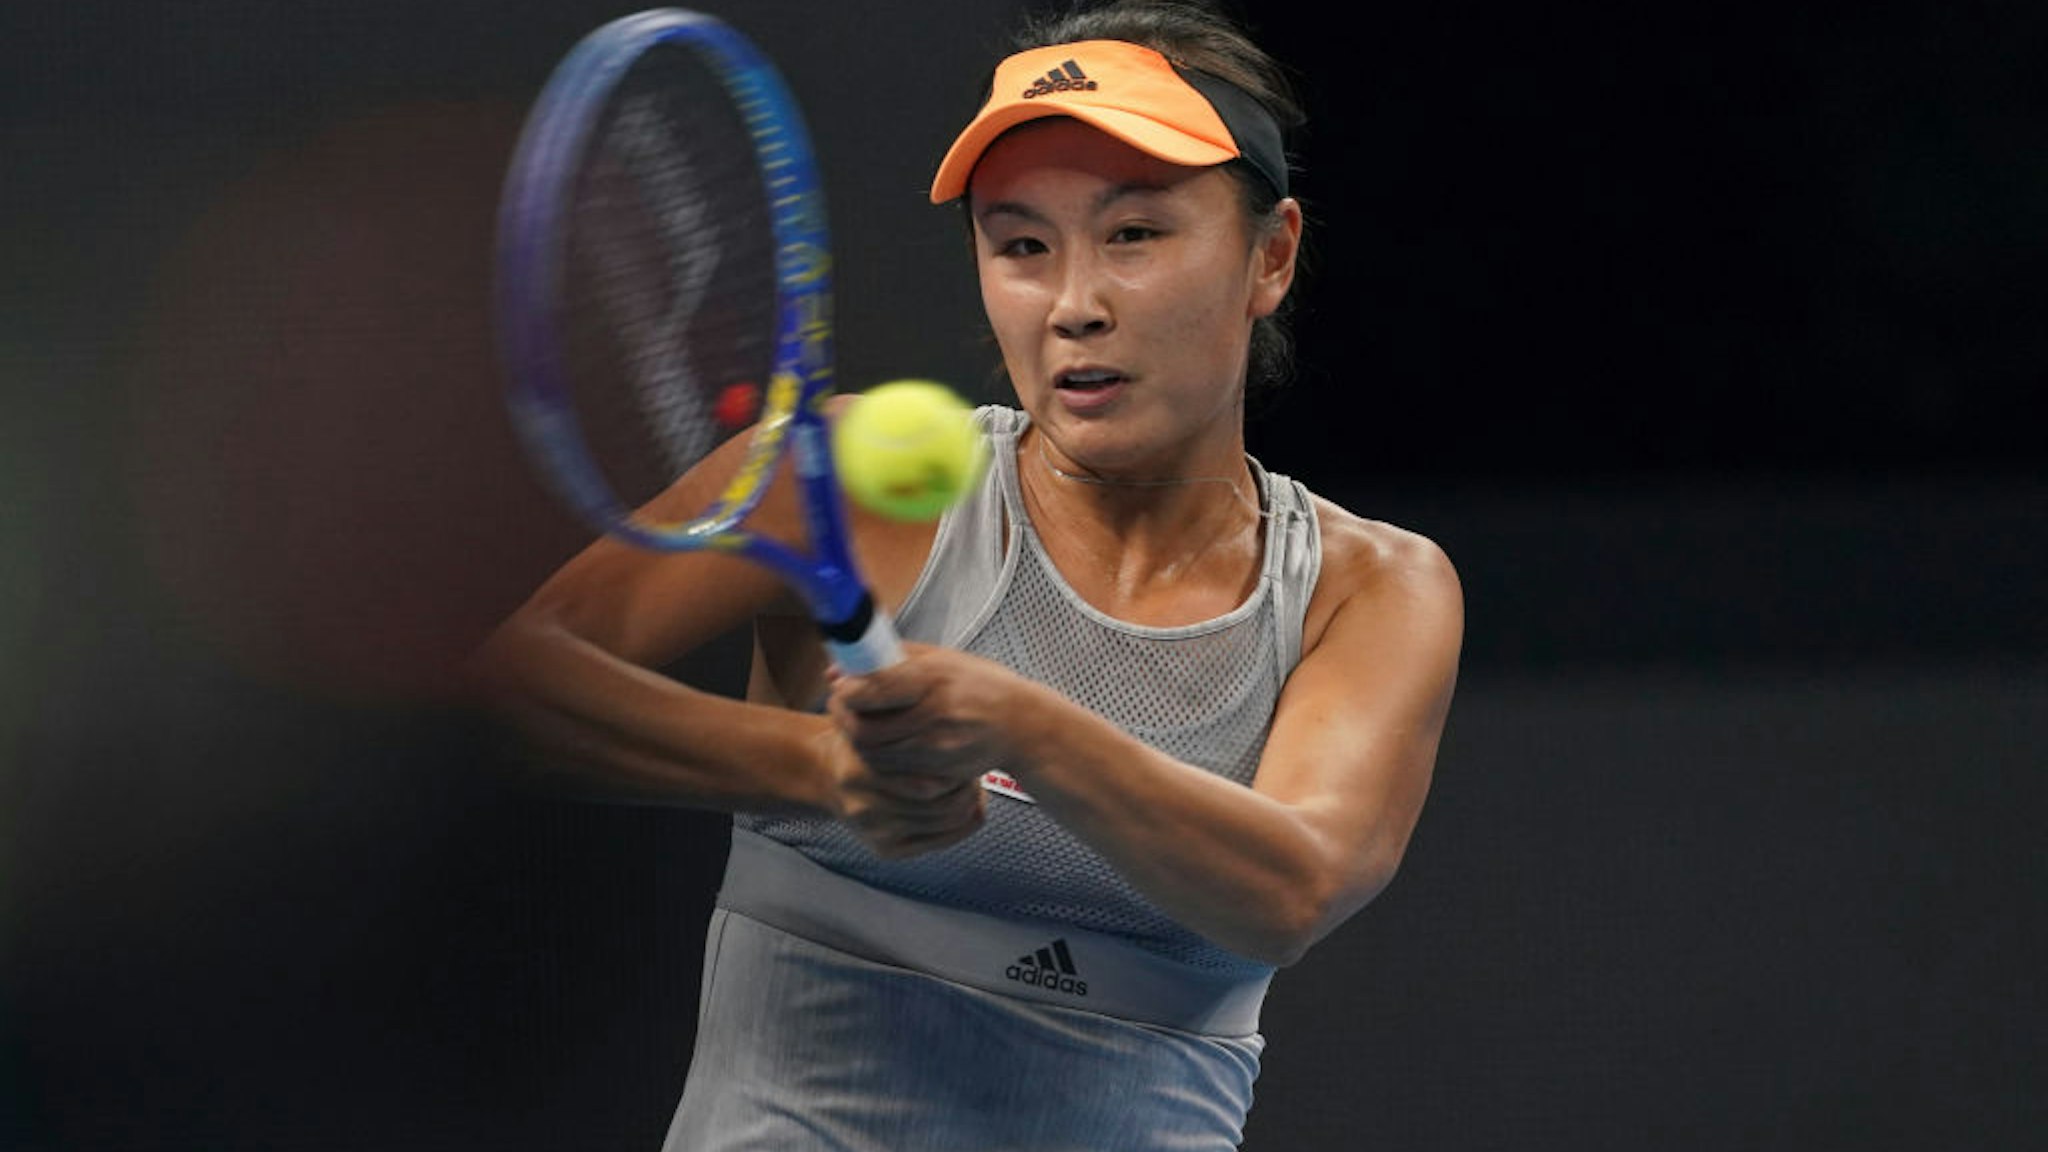 BEIJING, CHINA - SEPTEMBER 28: Peng Shuai of China in action against Daria Kasatkina of Russia during women's singles first round match 2019 China Open - Day 1 on September 28, 2019 in Beijing, China. (Photo by Fred Lee/Getty Images)